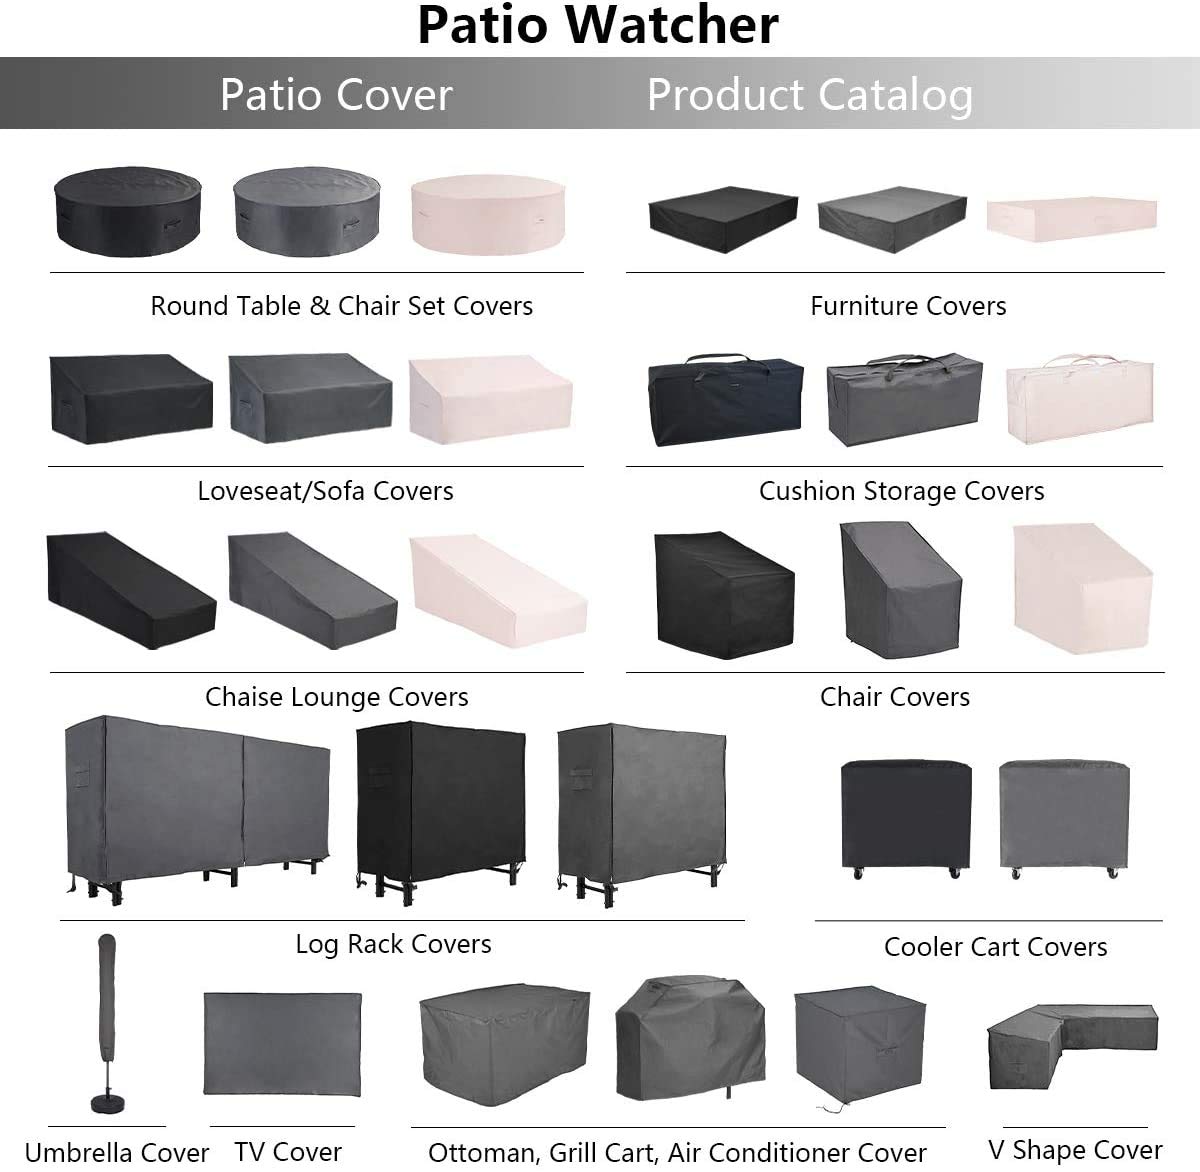 Patio watcher round table cover